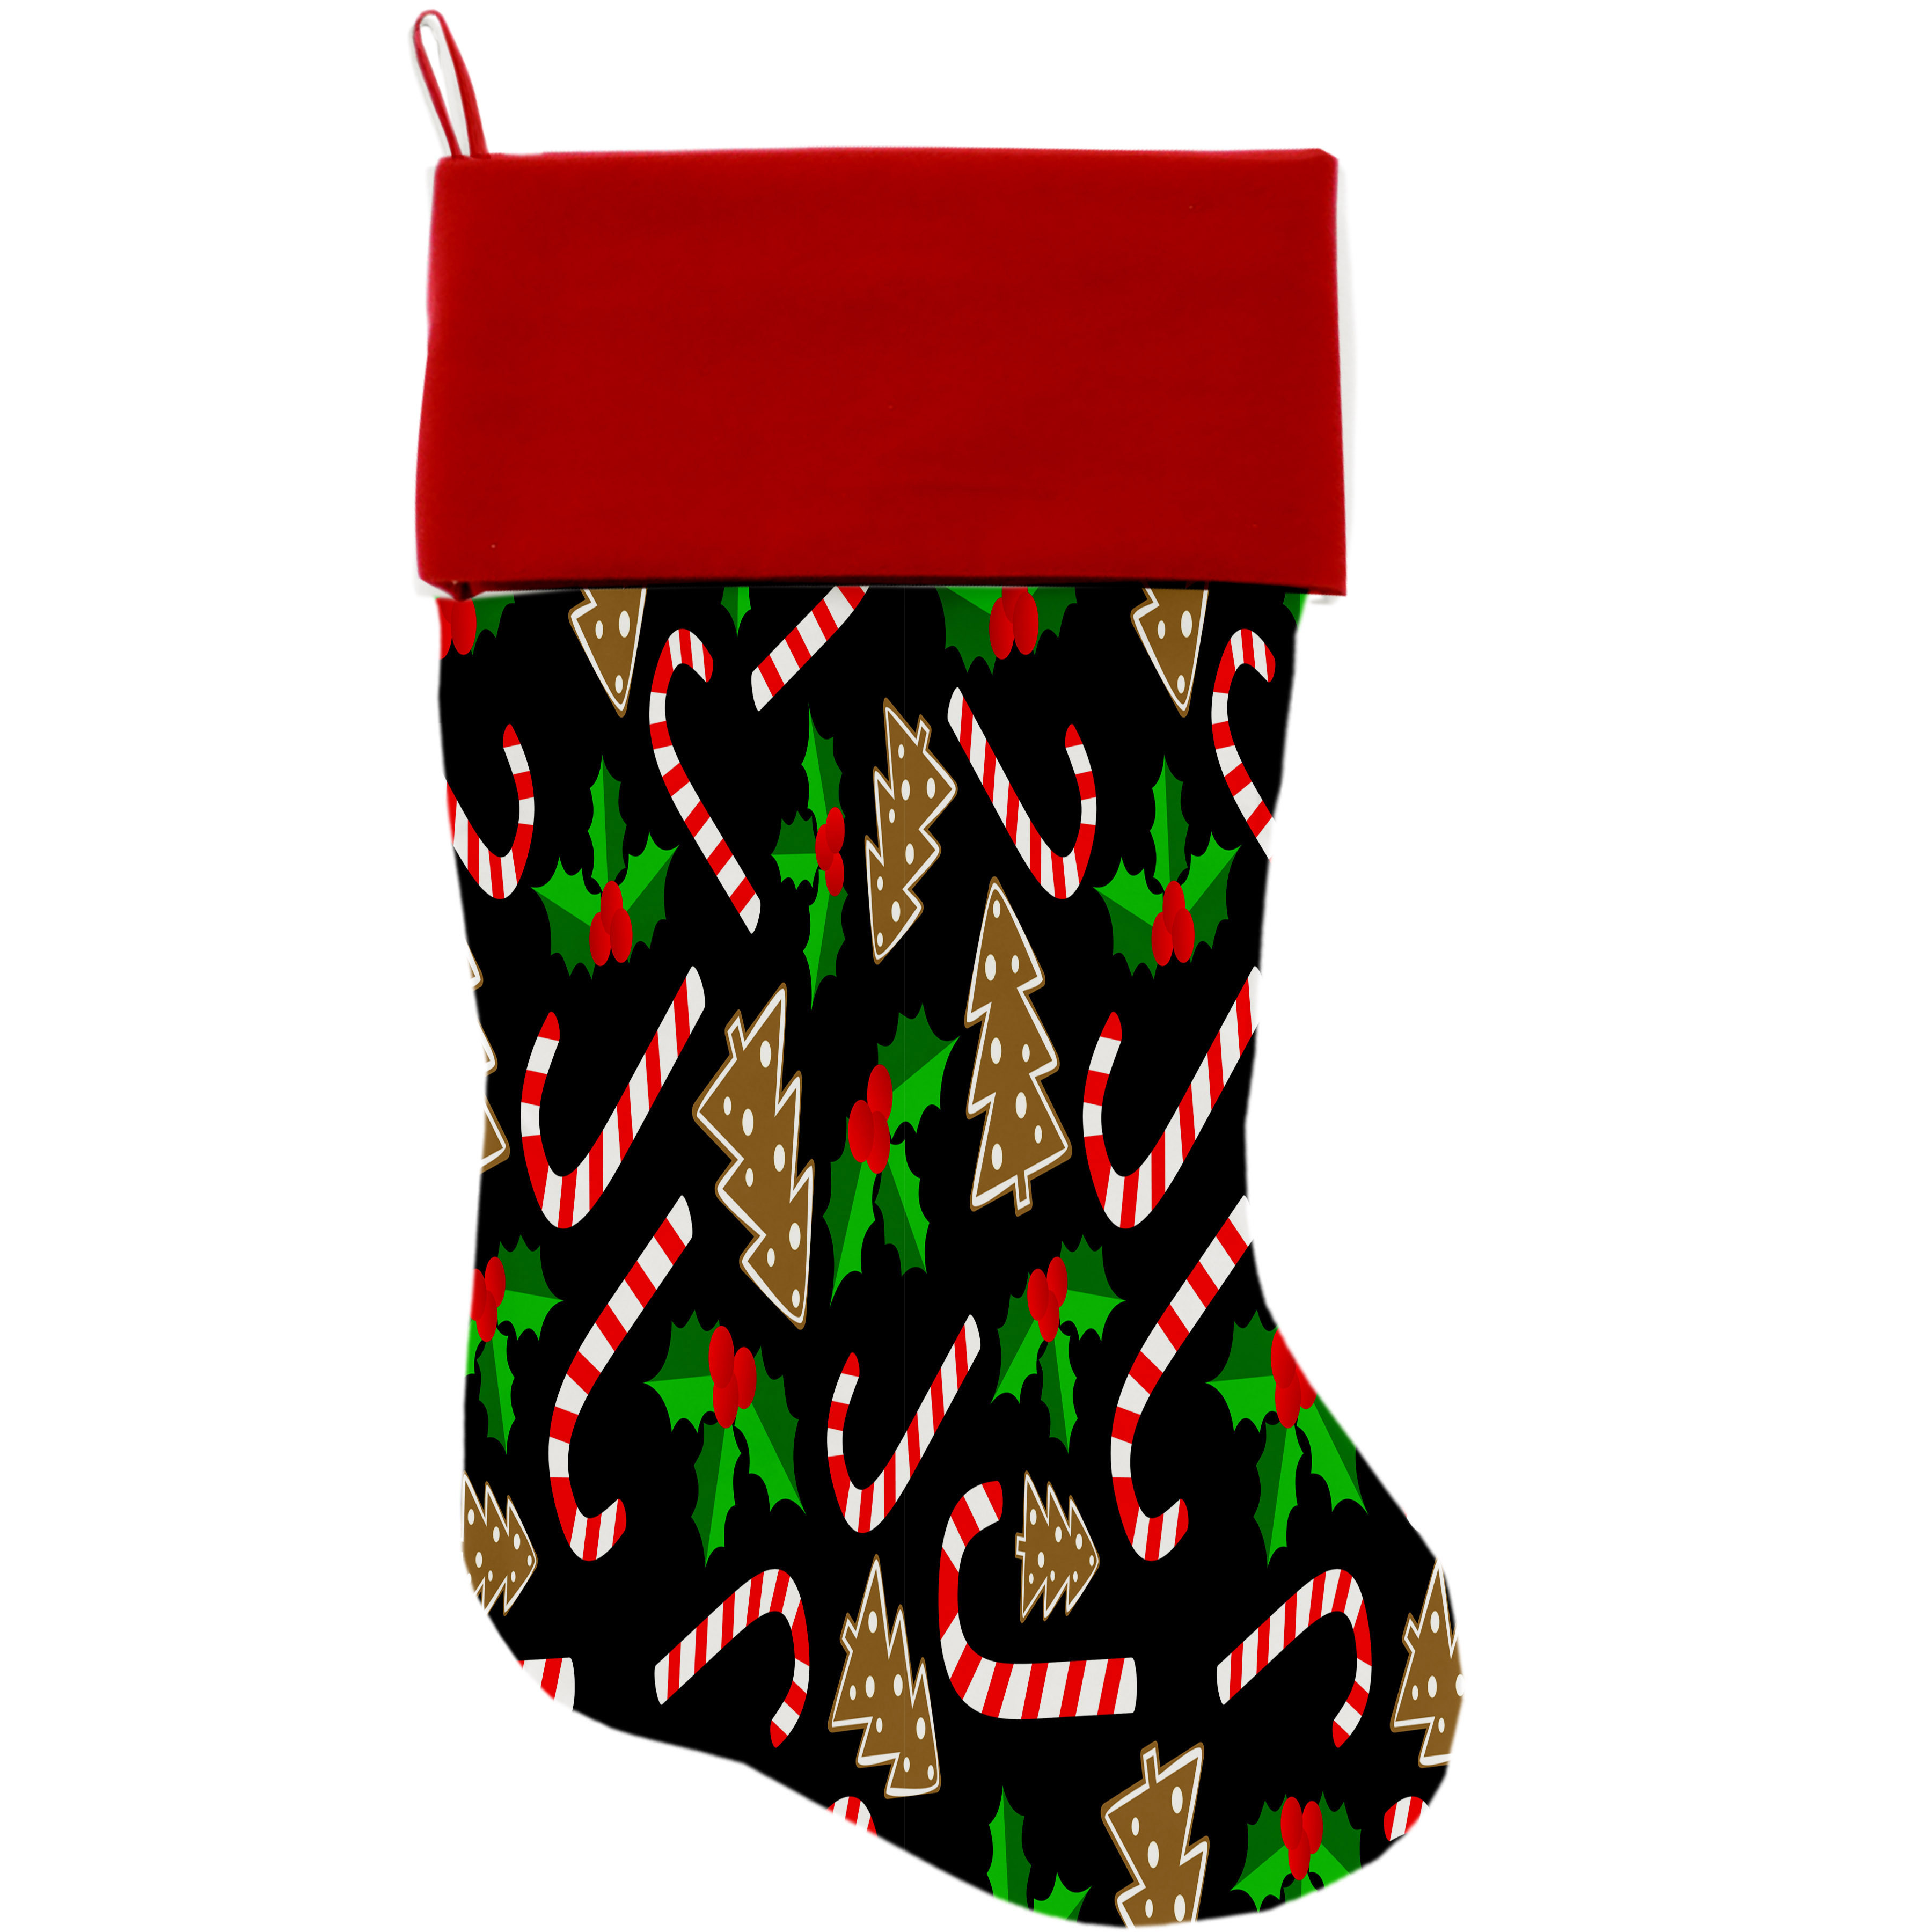 Candy Cane Christmas Stockings
 Candy Cane Chaos Christmas Stocking